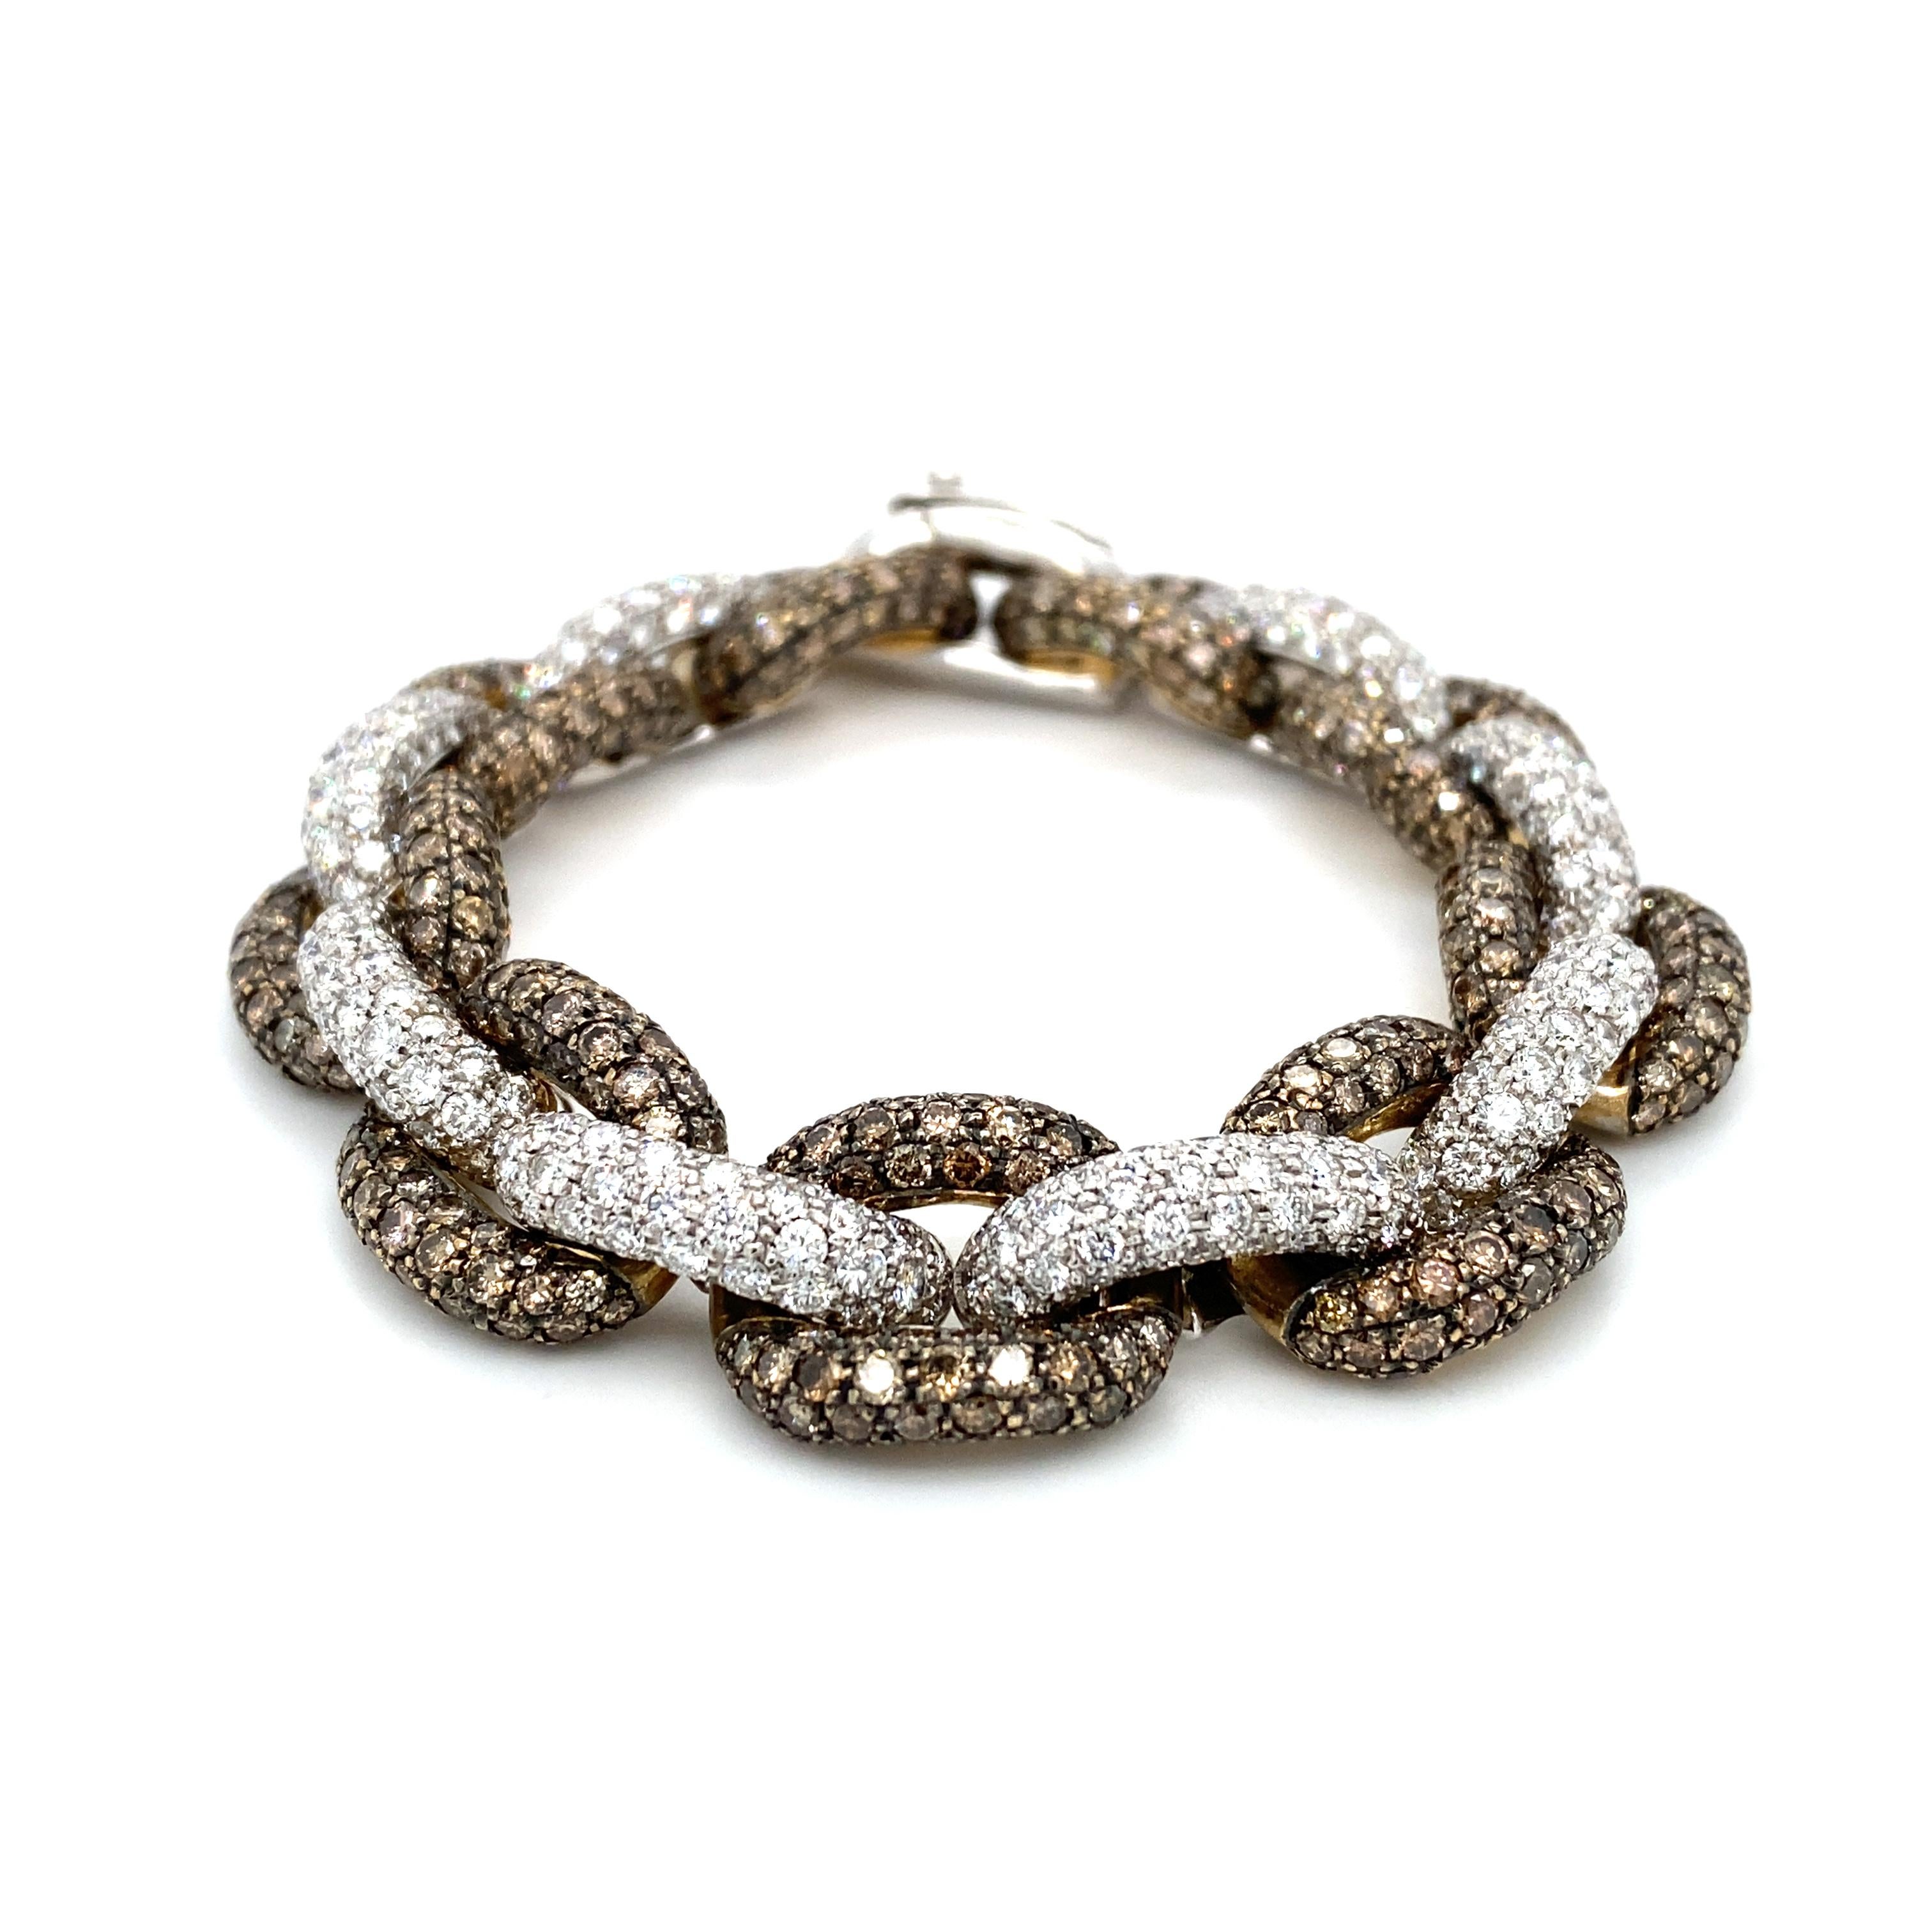 10.0 CTW White and Fancy Brown Diamond Chain Bracelet in 14 Karat Gold In Excellent Condition For Sale In Atlanta, GA